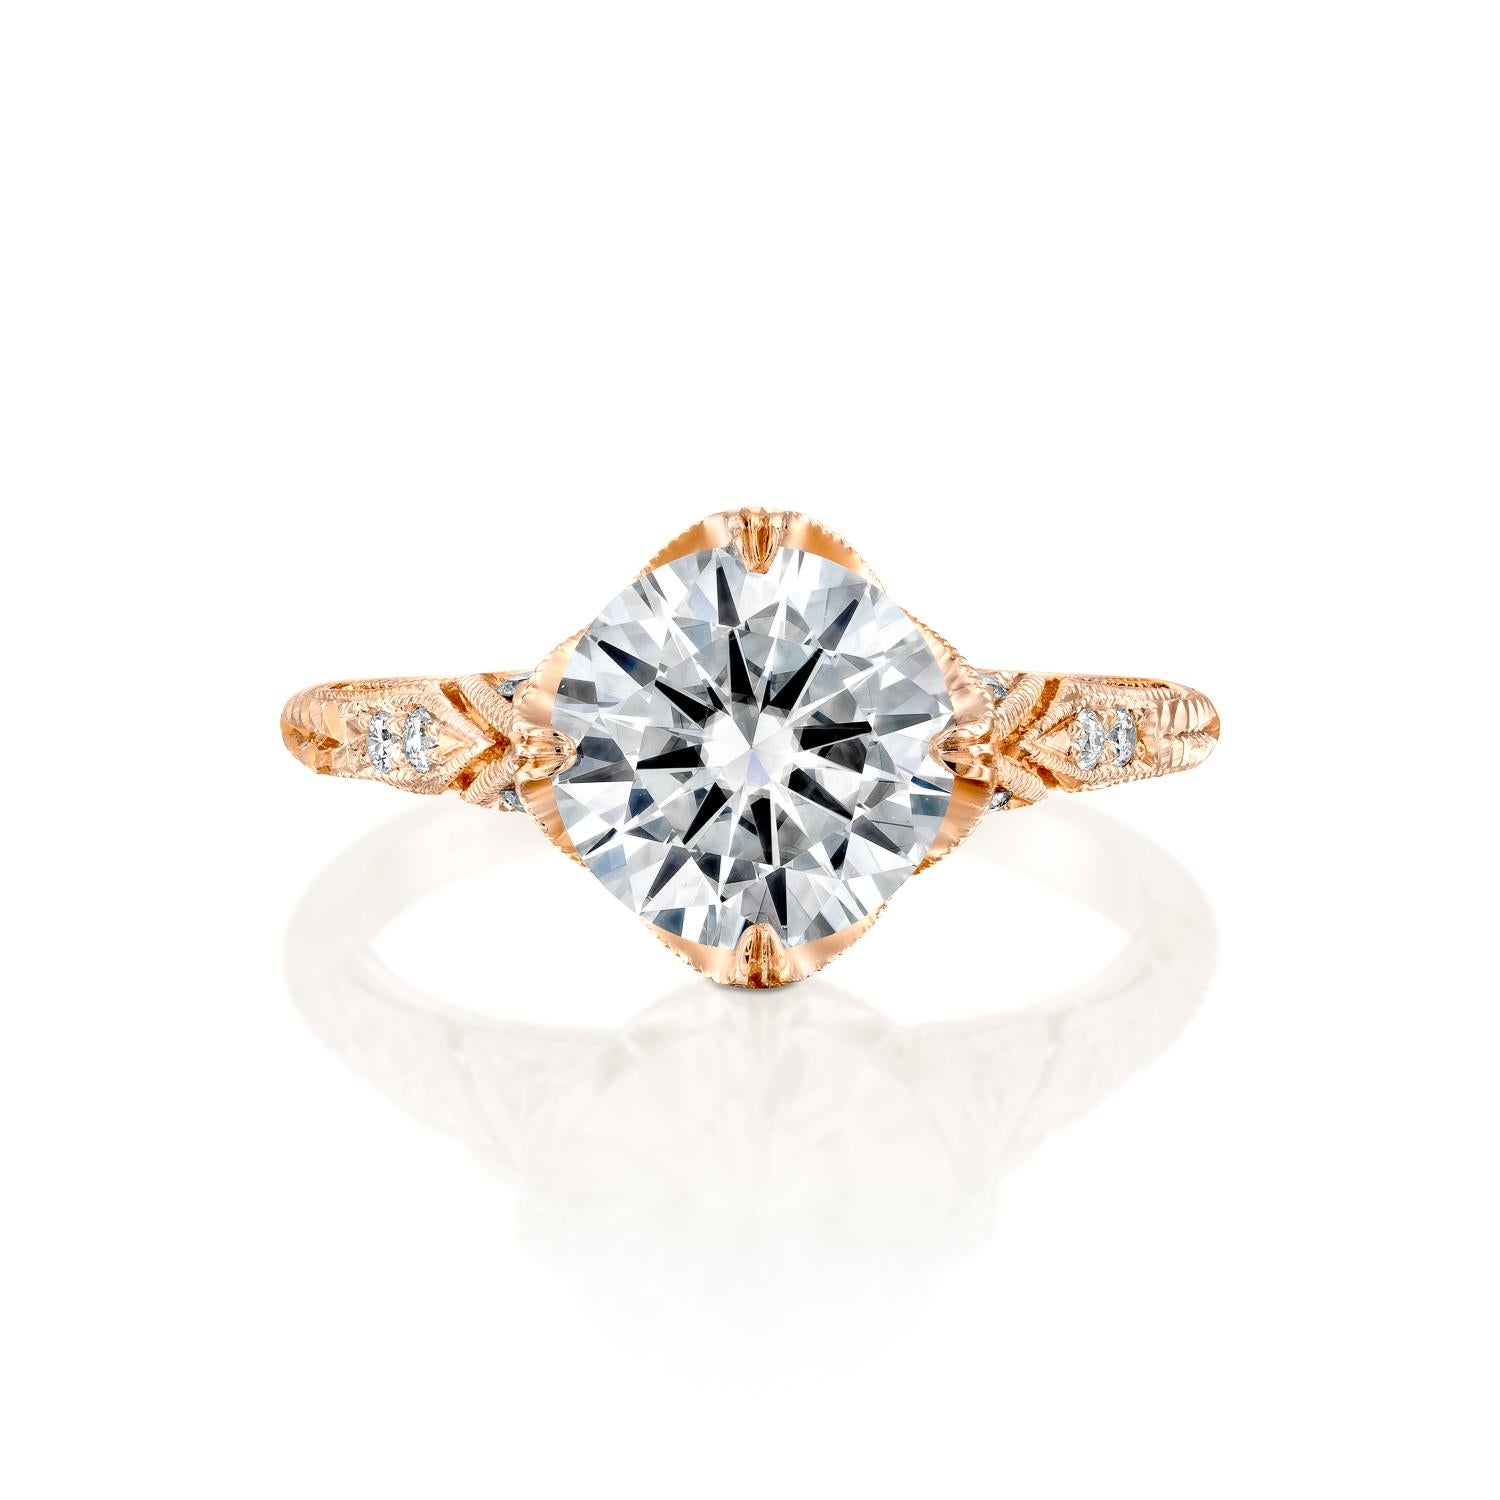 This gorgeous ring features a solitaire GIA certified diamond. Center stone is natural 2 carat, round shaped 100% eye clean natural diamond of F-G color and VS2-SI1 clarity and it is surrounded by smaller natural round diamonds of 0.2 total carat